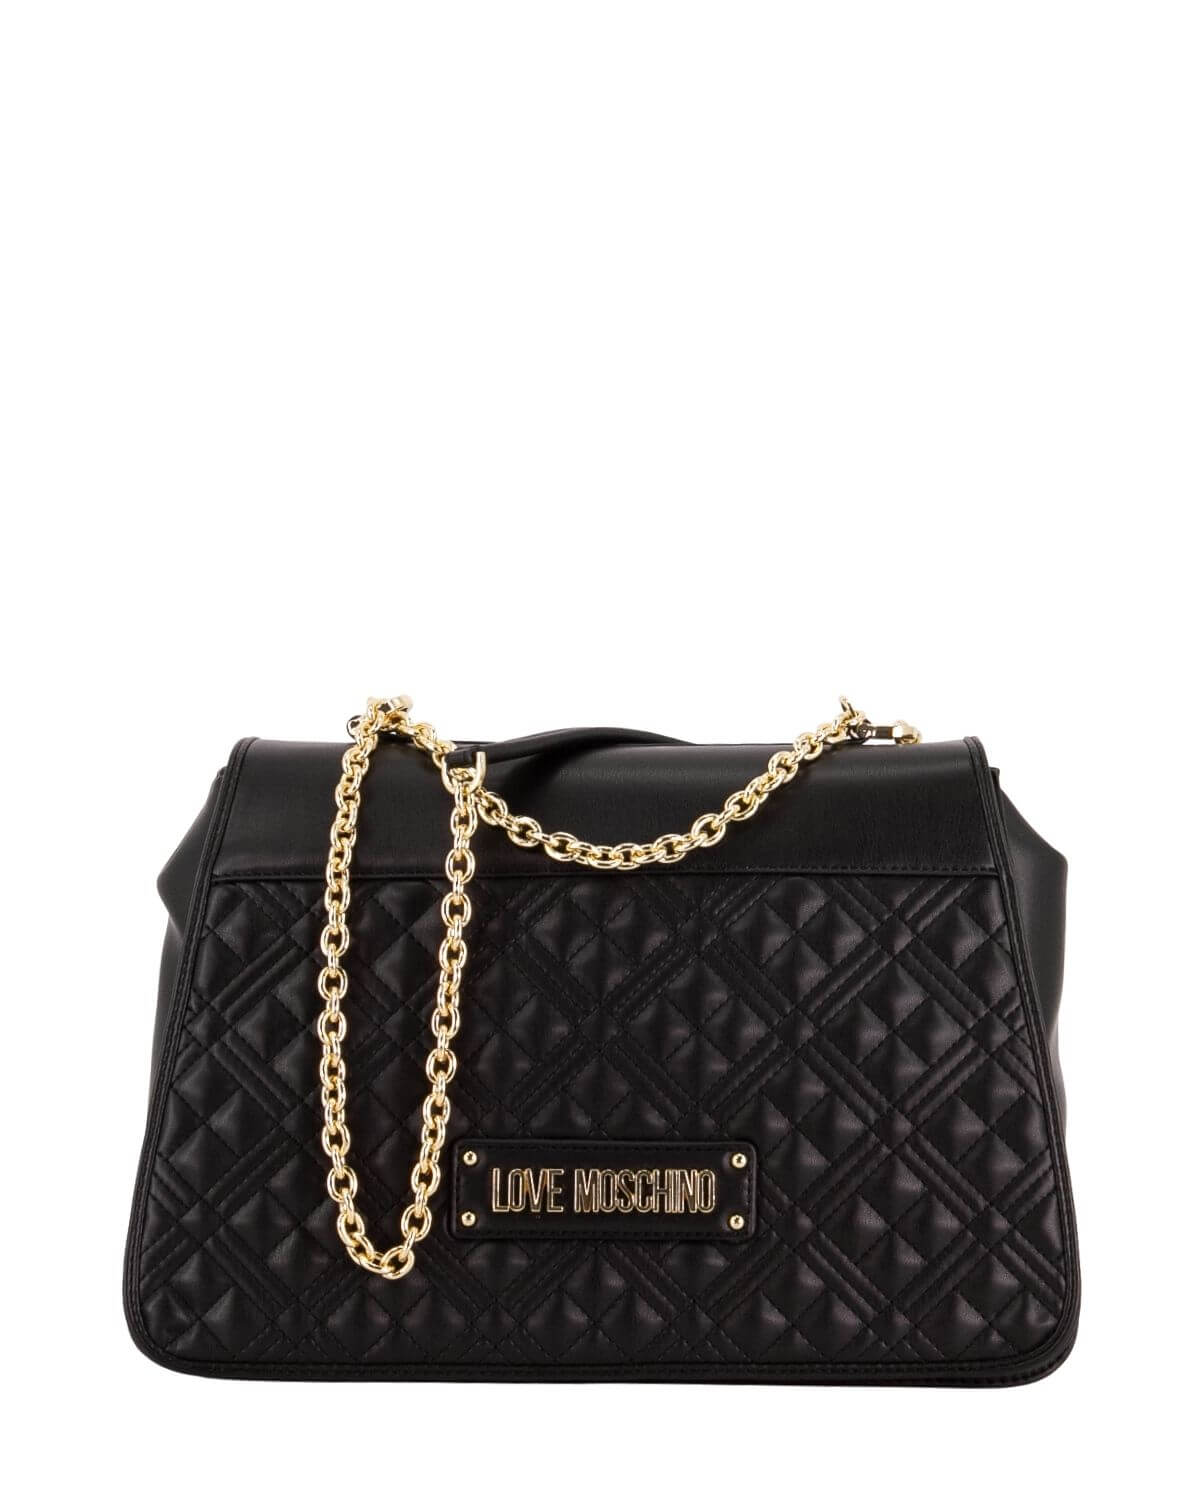 BORSA QUILTED PU